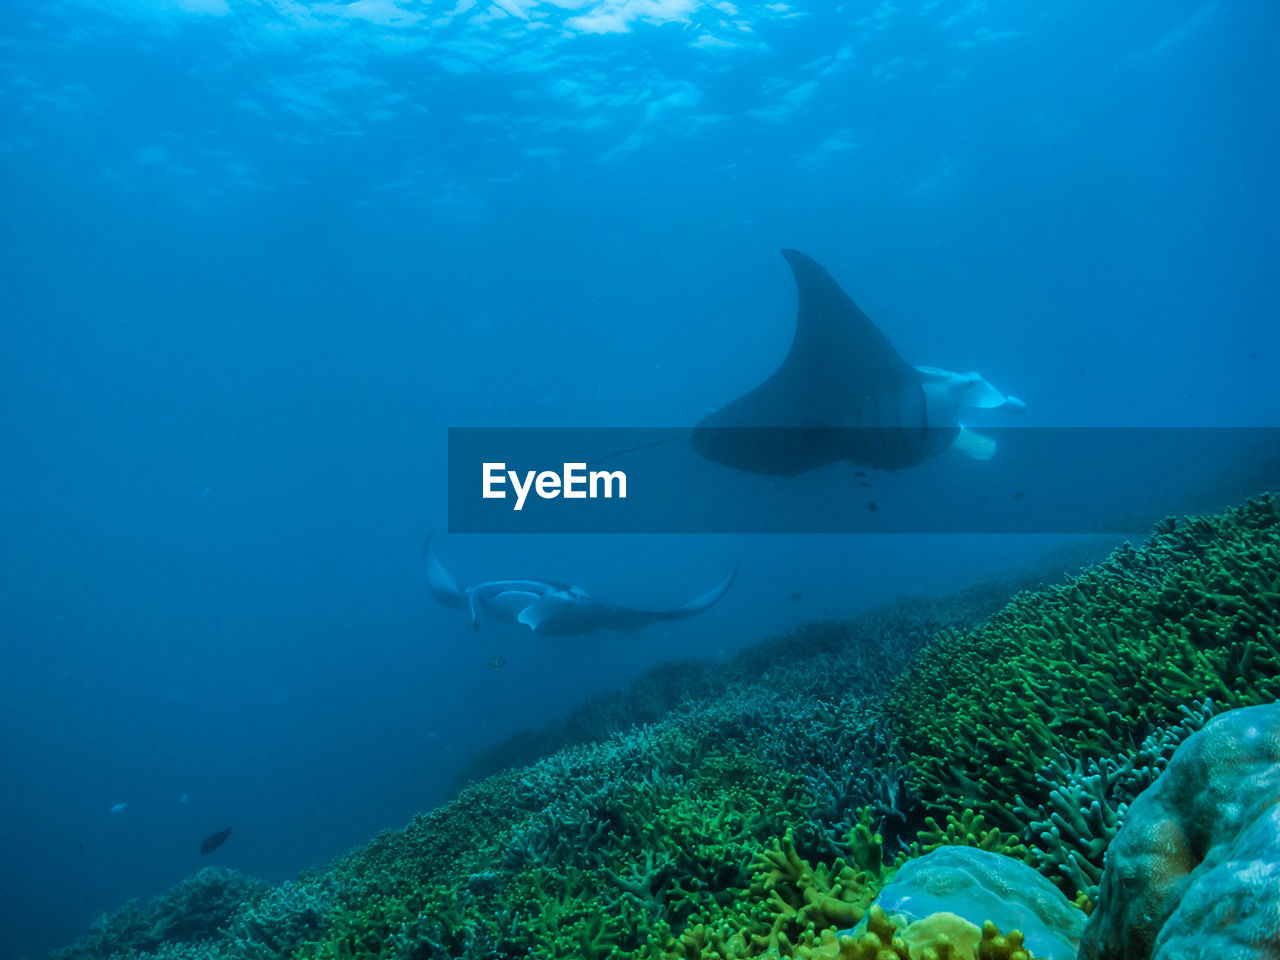 sea, underwater, animal wildlife, animal, animal themes, water, undersea, wildlife, swimming, sea life, fish, marine, rays and skates, nature, ocean, stingray, manta ray, reef, marine biology, one animal, sports, adventure, blue, coral, no people, beauty in nature, water sports, coral reef, outdoors